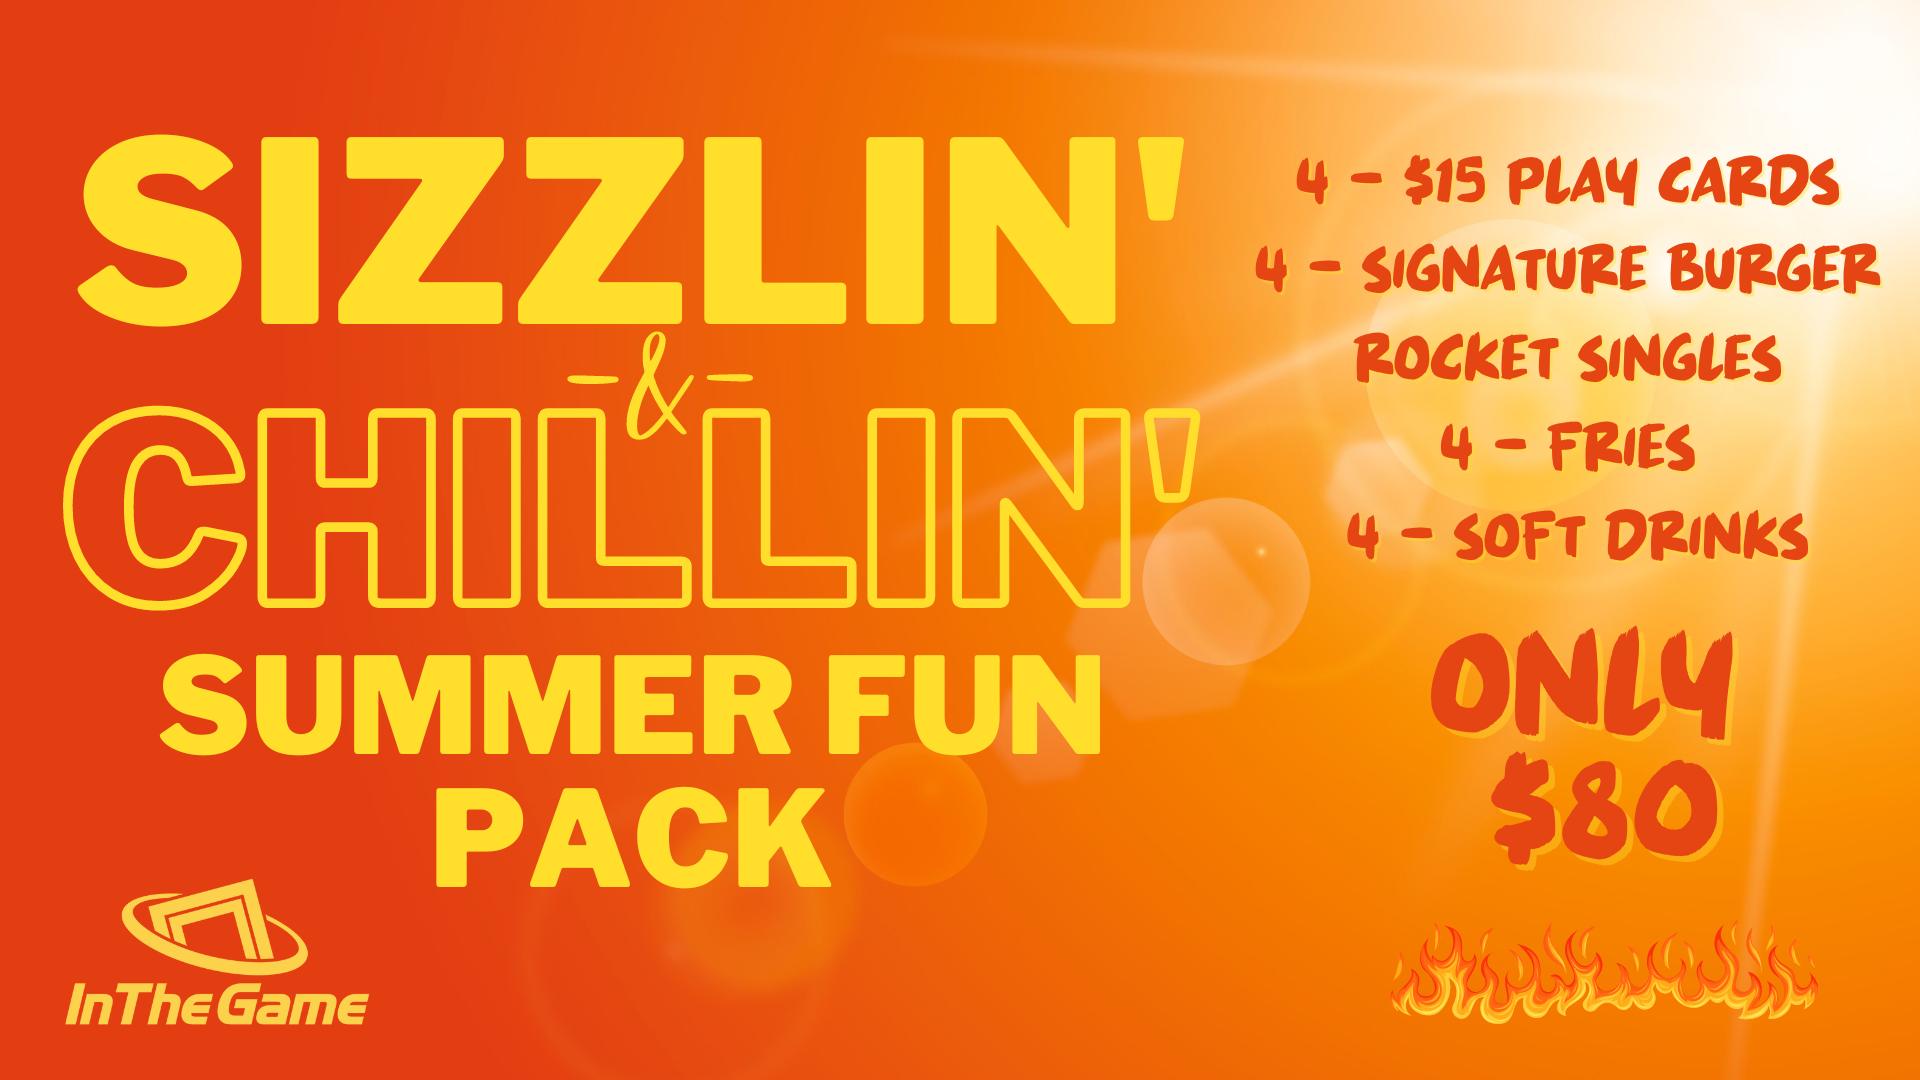 Summer fun with the Sizzlin' and Chillin' Package: 4 $15 play cards, 4 signature burgers, 4 fries, 4 soft drinks for only $80